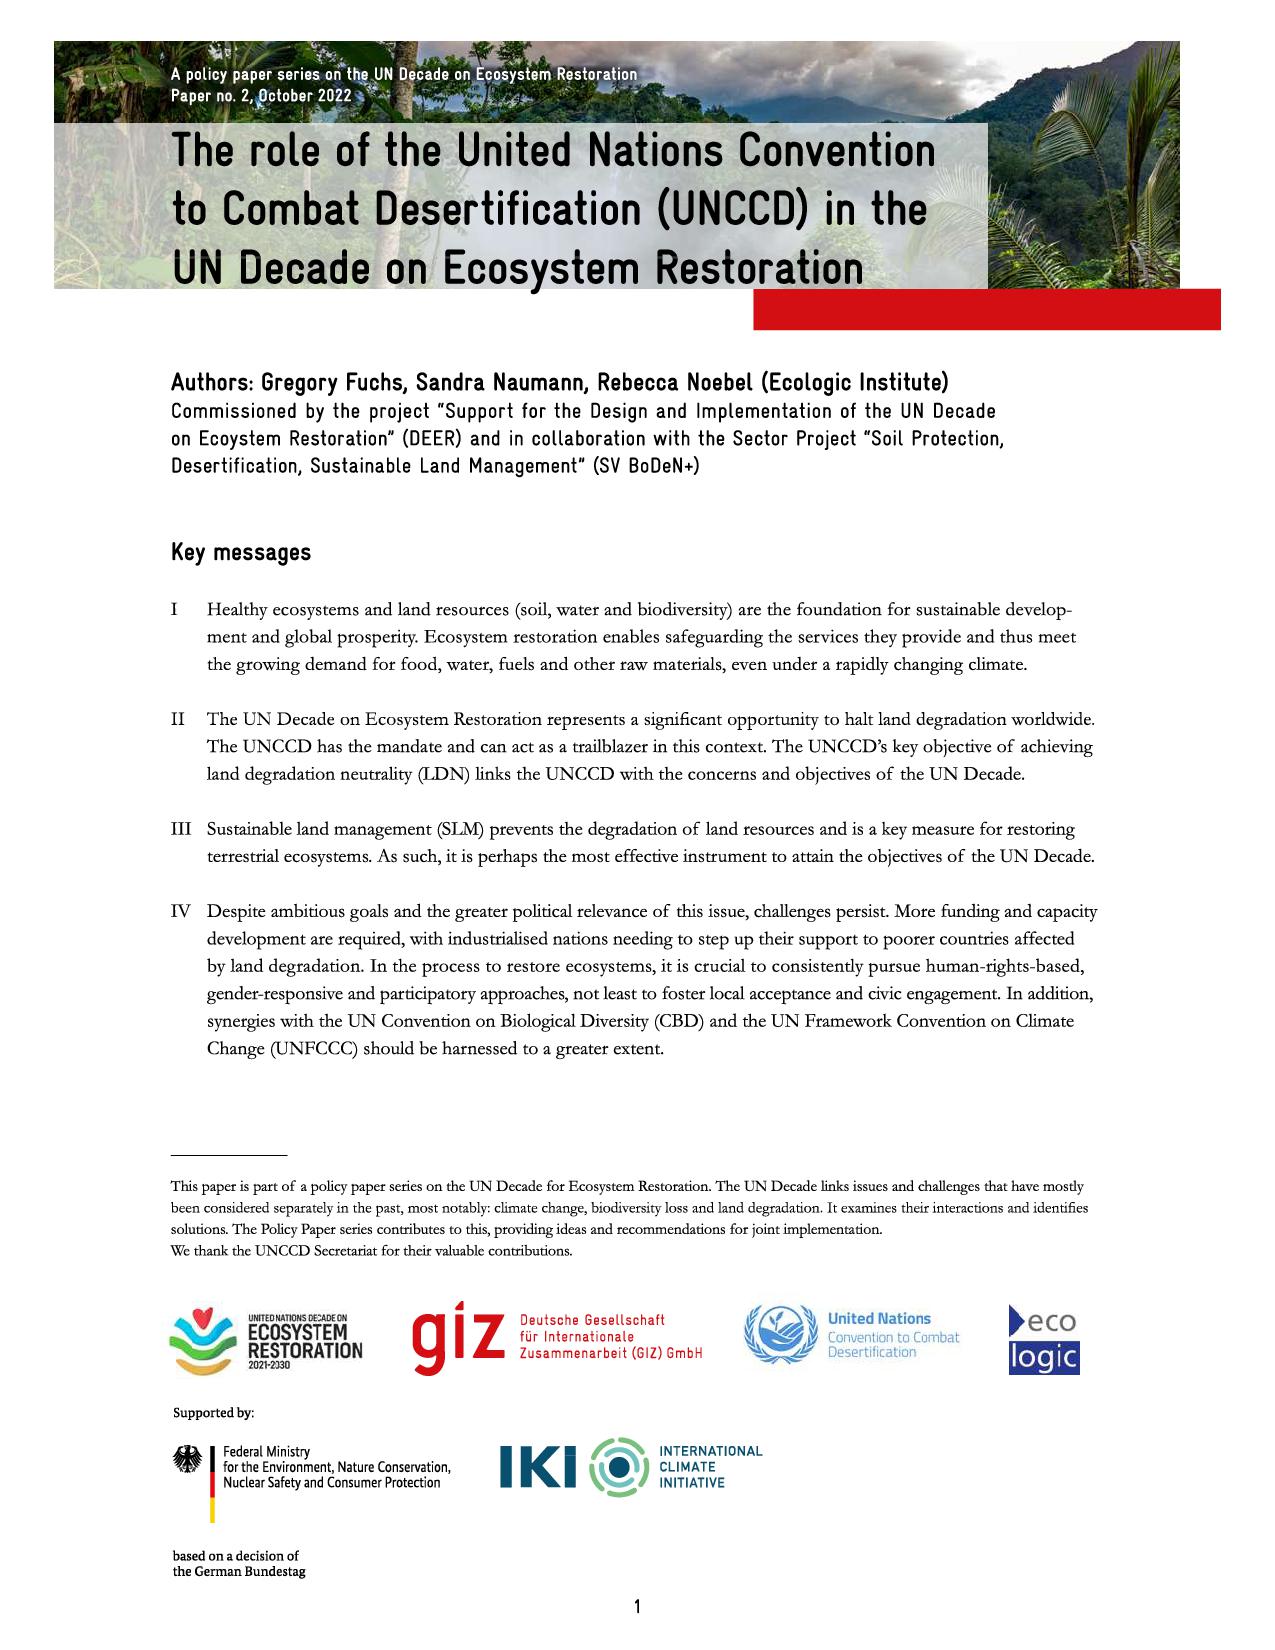 Cover Page of Policy Brief: "The role of the United Nations Convention to Combat Desertification (UNCCD) in the UN Decade on Ecosystem Restoration" with Key Messages